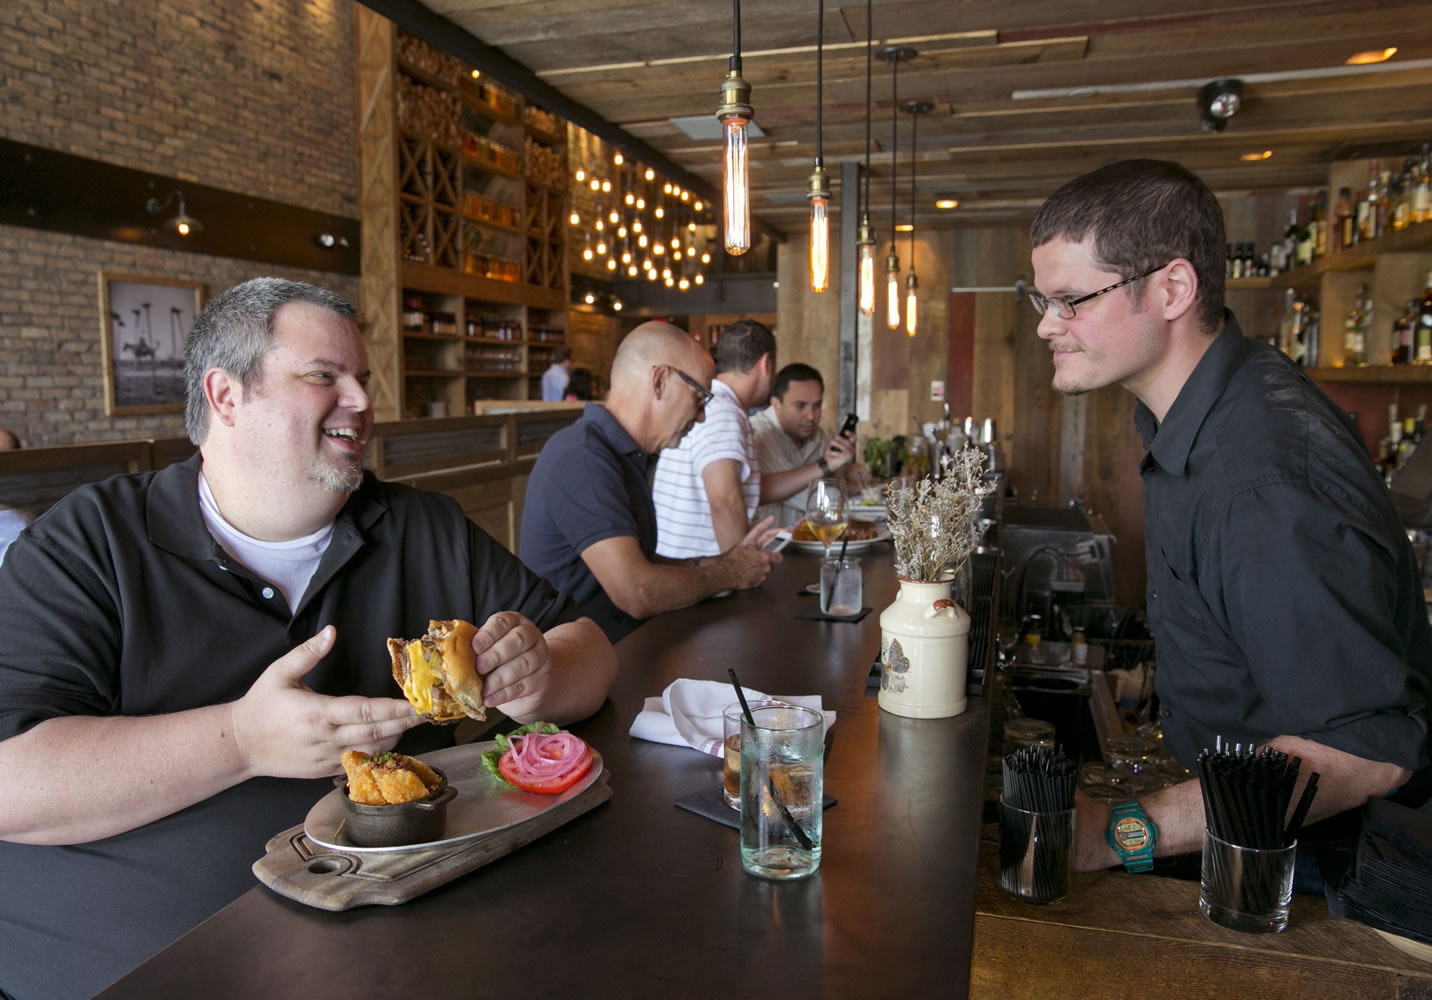 Sef Gonzalez of Miami runs the blog Burger Beast. Gonzalez says the Swine Burger at Swine Southern Table &amp; Bar in Coral Gables, Fla., is the best in Miami-Dade County.